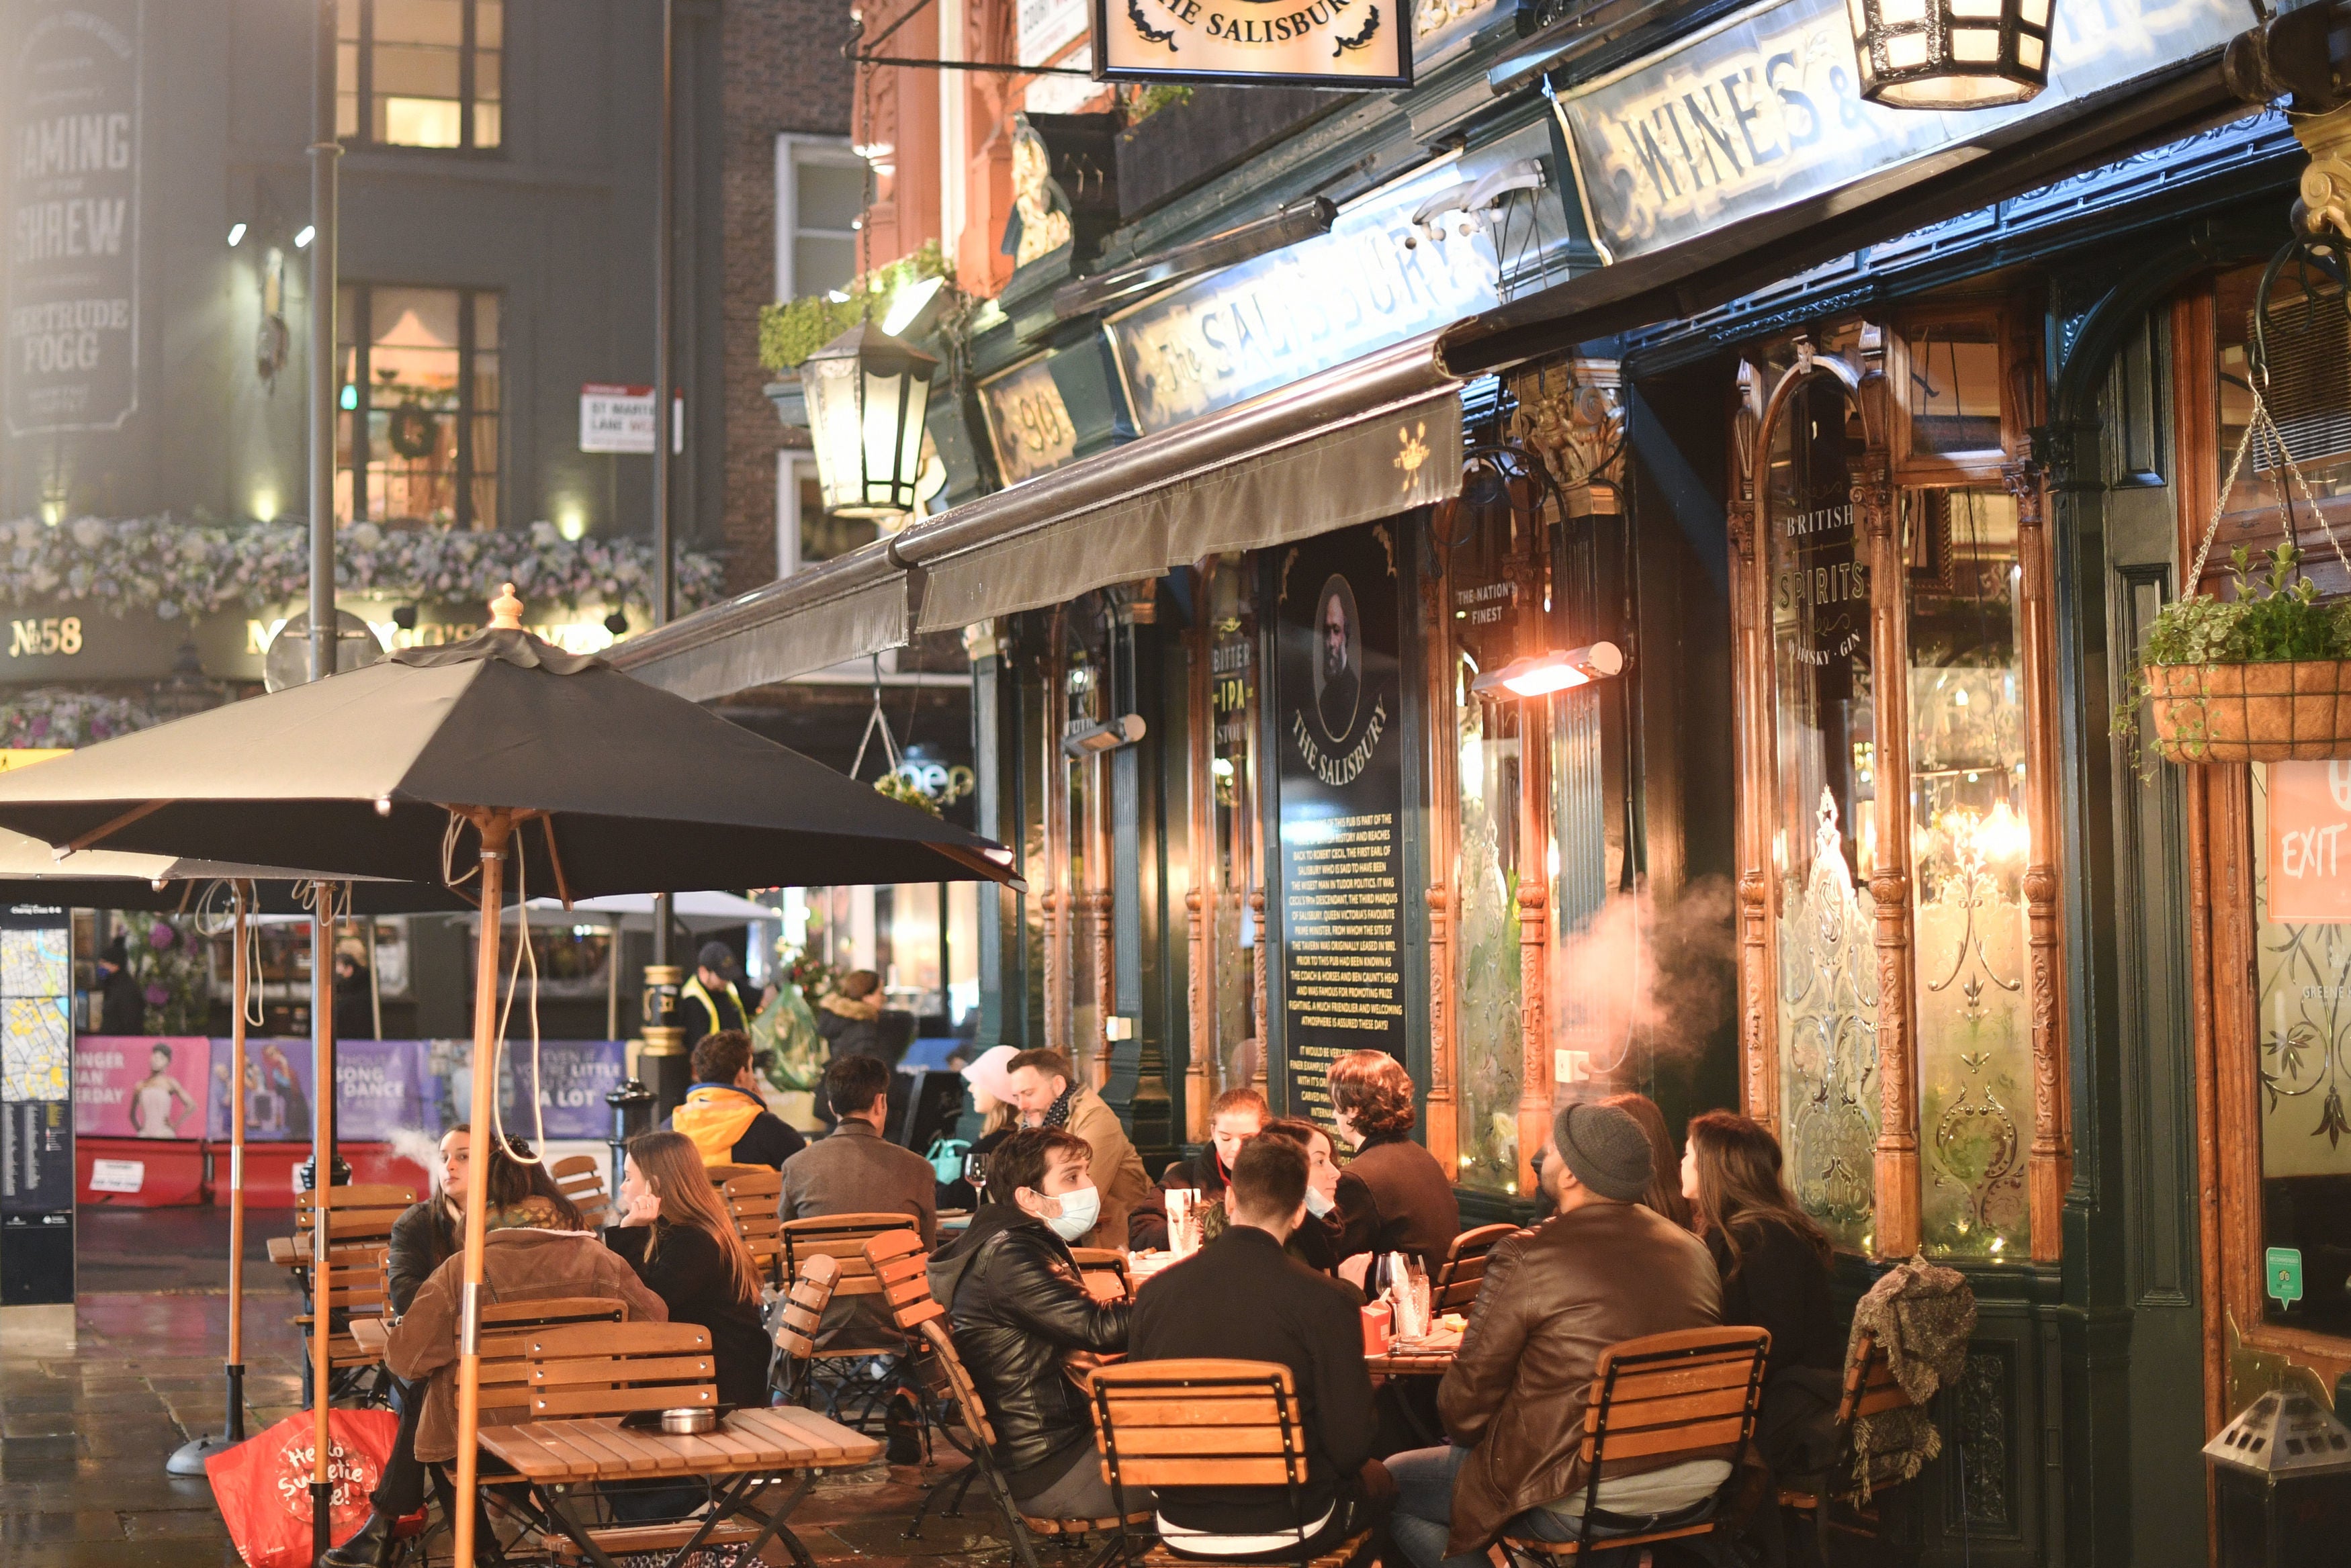 Pubs in London and other Tier 3 areas can only provide food and drink as a takeaway service